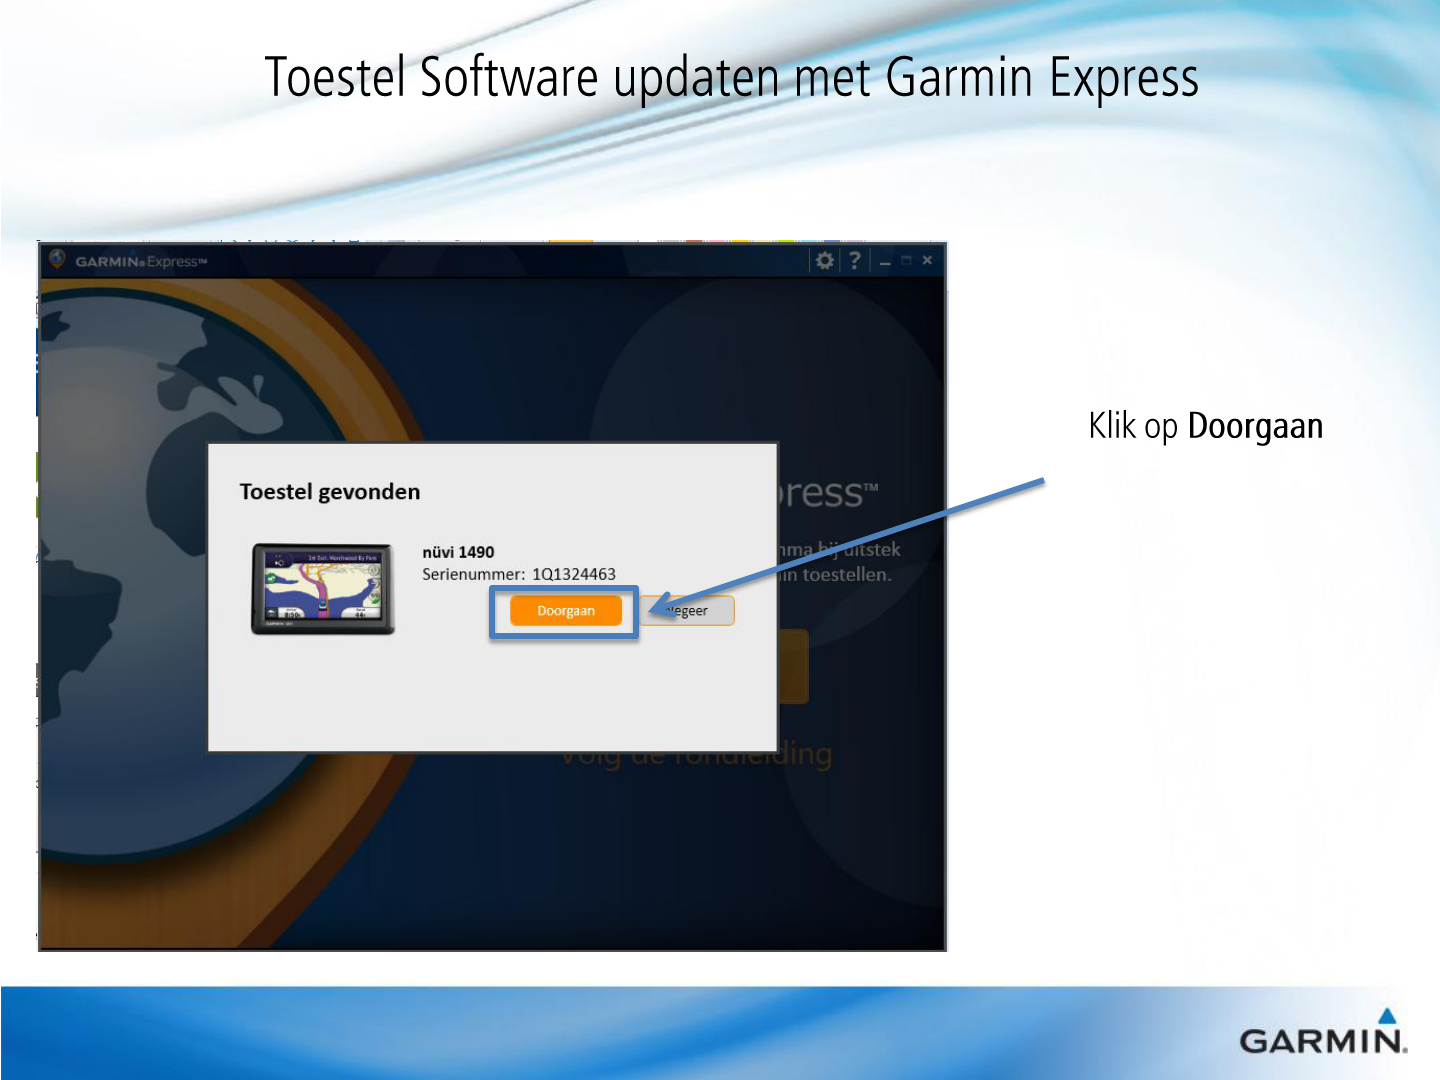 garmin express waiting for you to plug in nothing happens